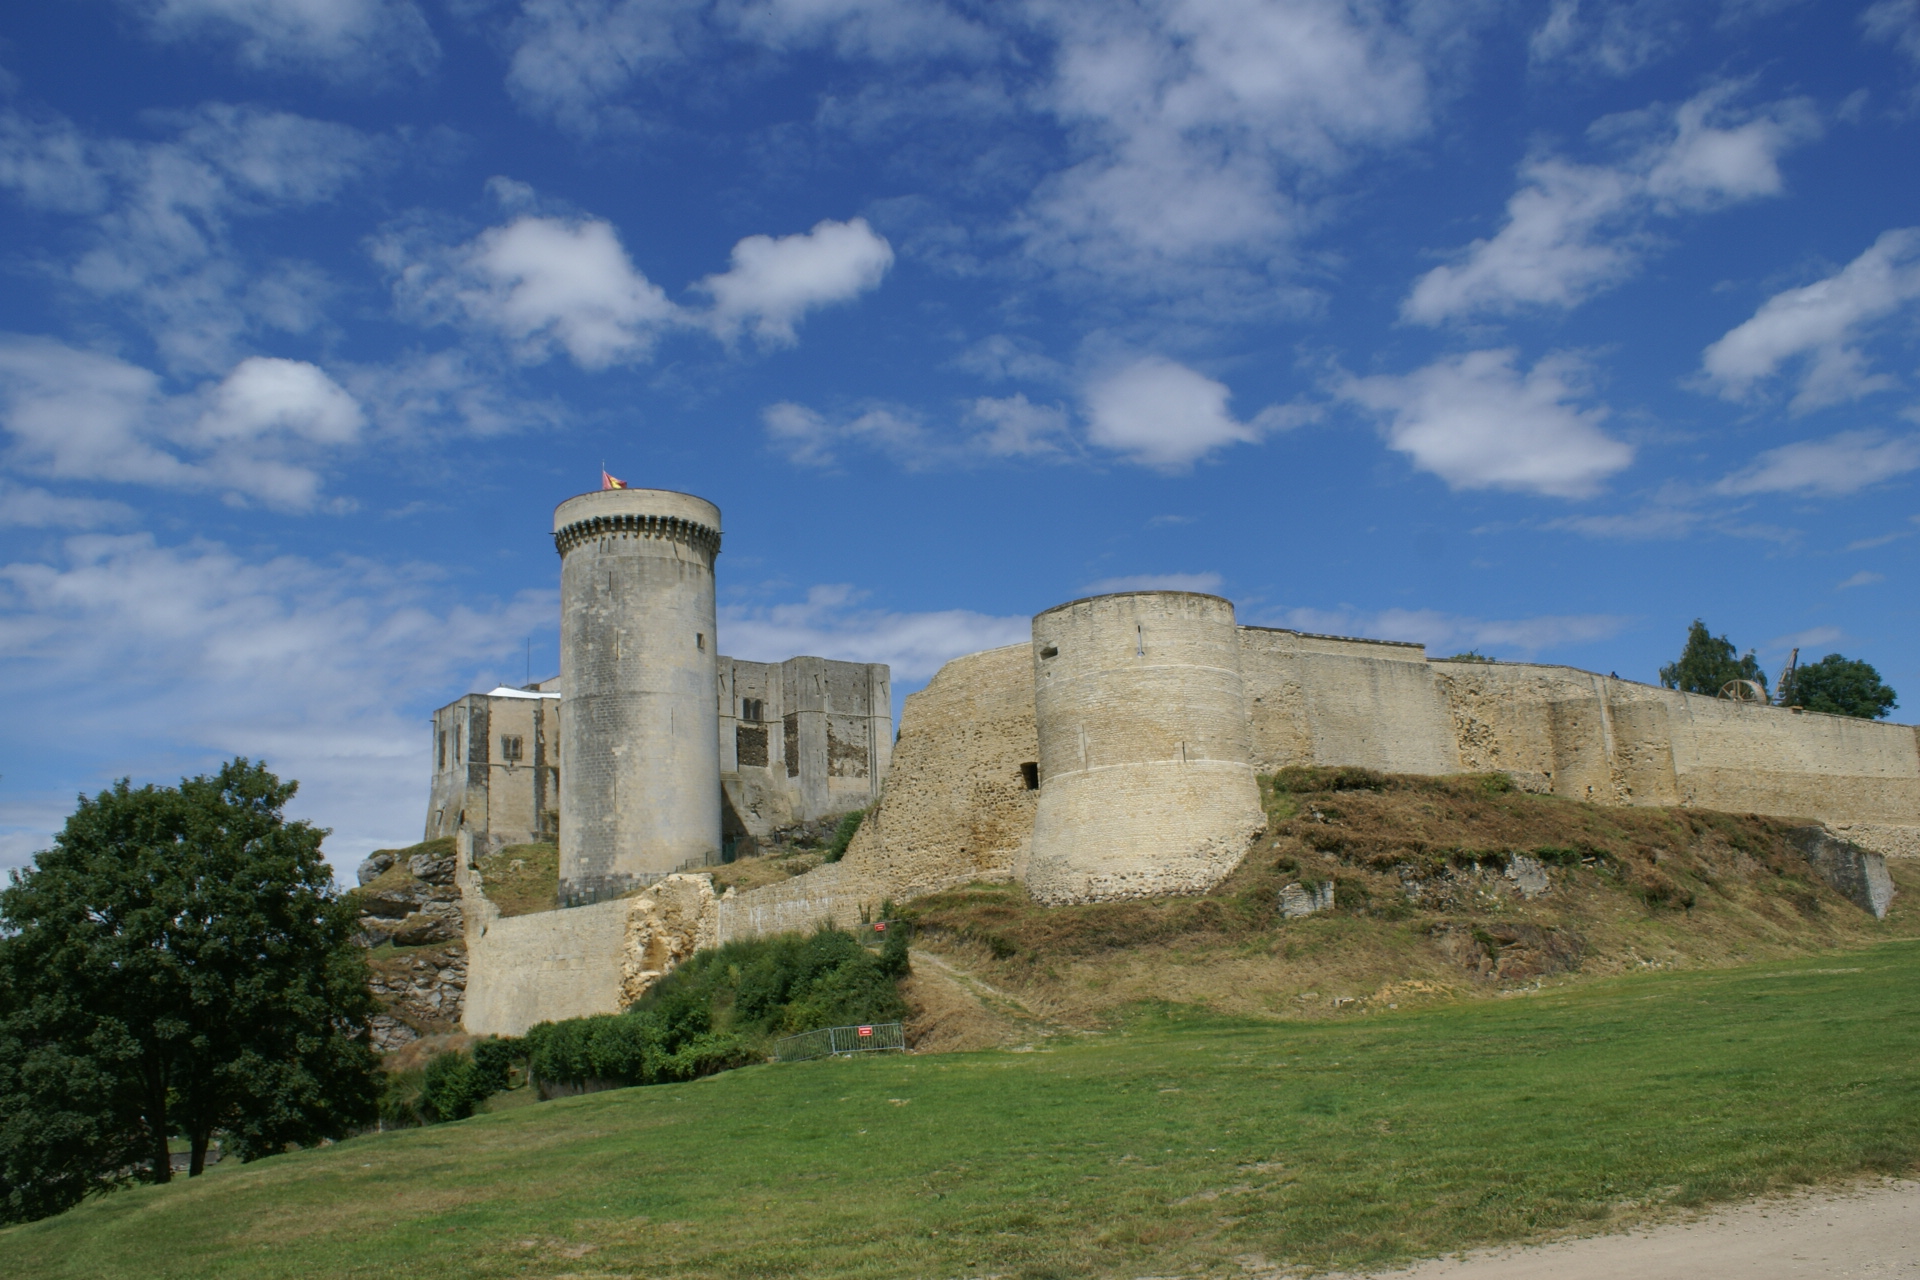 Falaise Castle, Normandy - birthplace of William the Conqueror